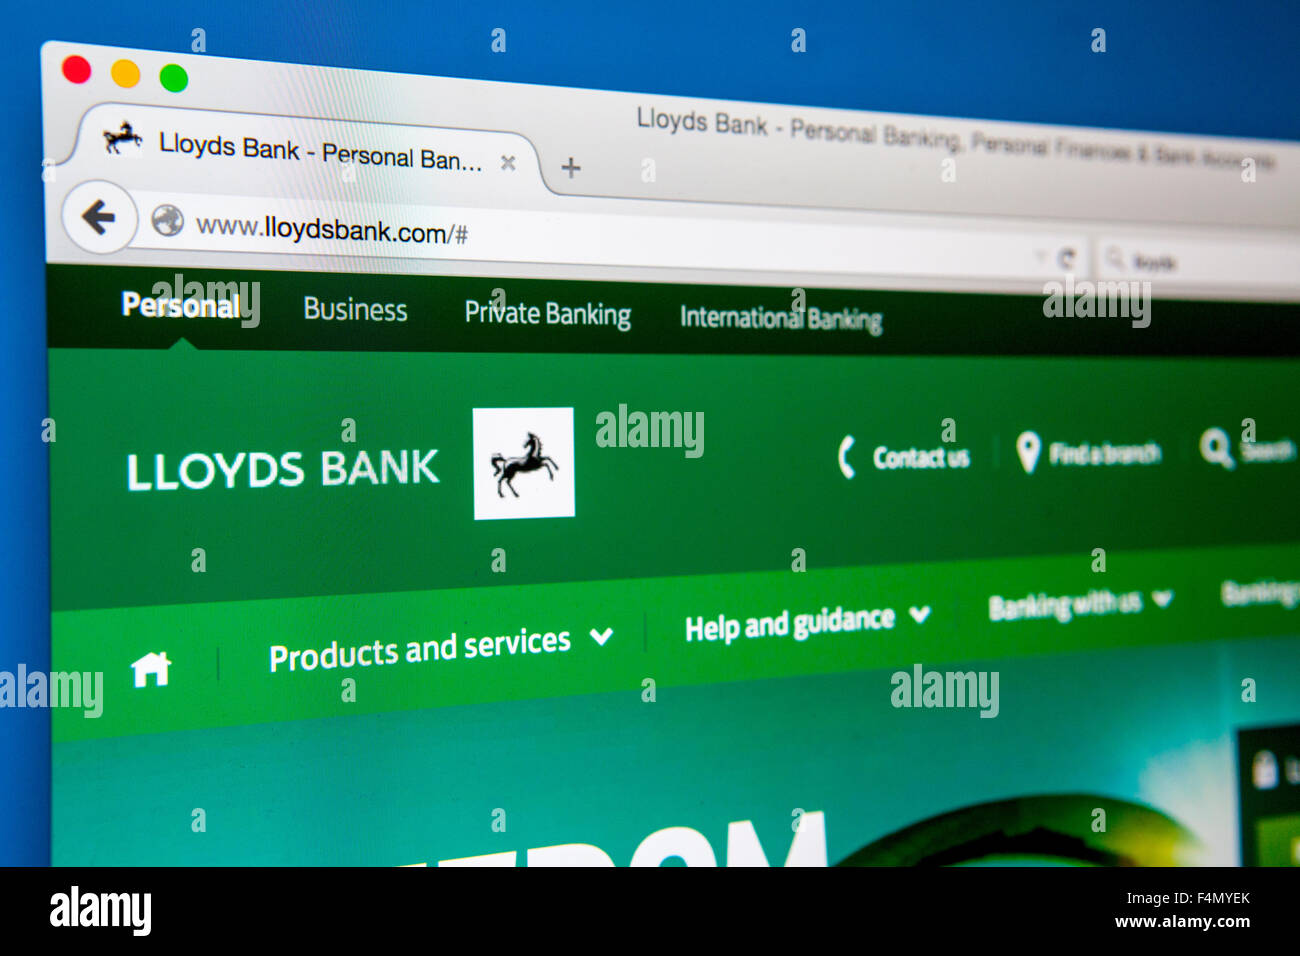 LONDON, UK - JUNE 20TH 2015: The homepage of the Lloyds Bank website, on 20th June 2015. Stock Photo